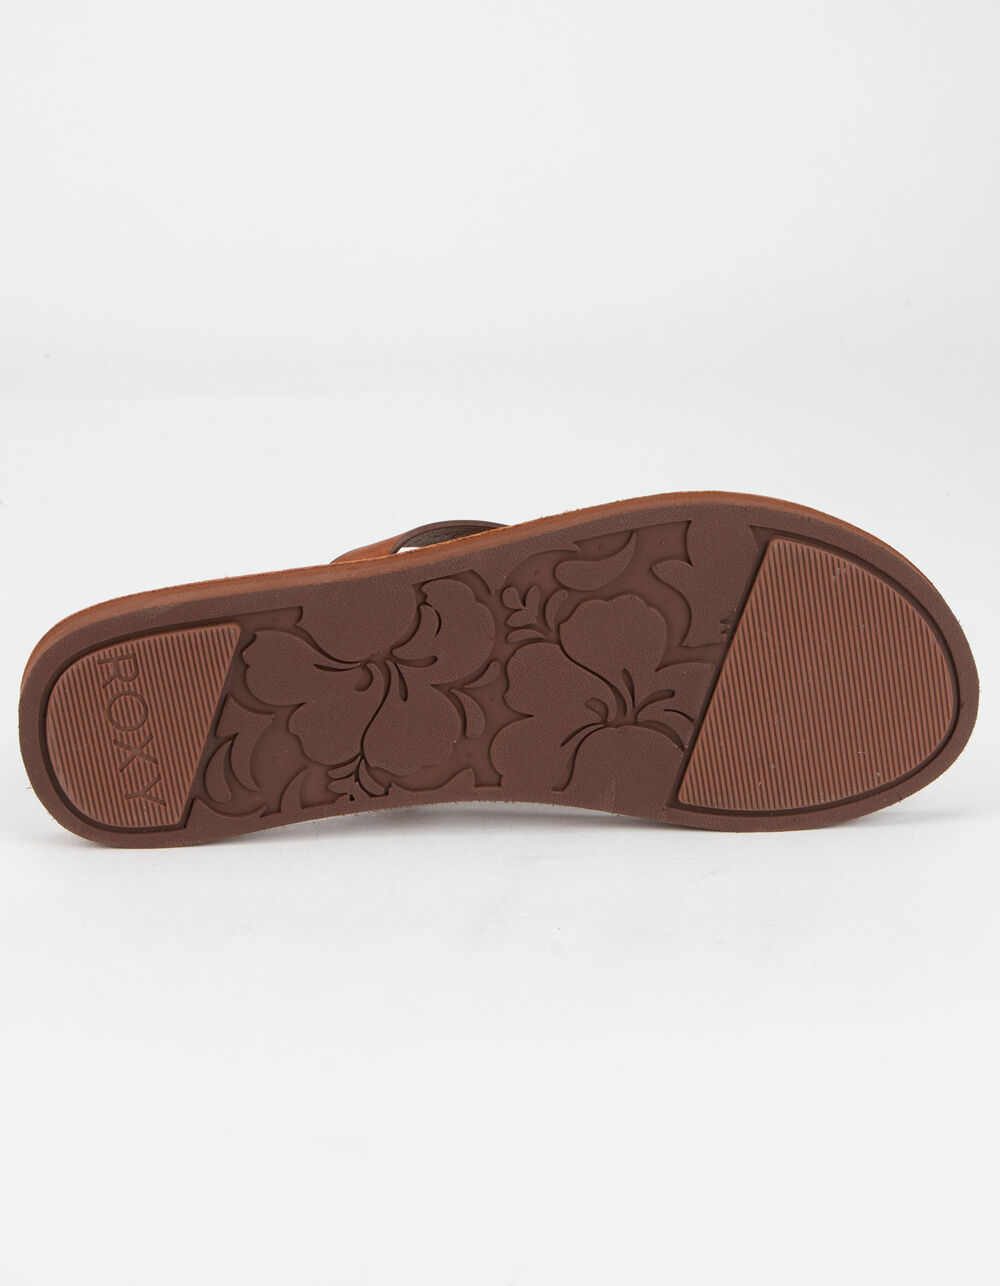 ROXY Brinn Womens Leather Sandals image number 3